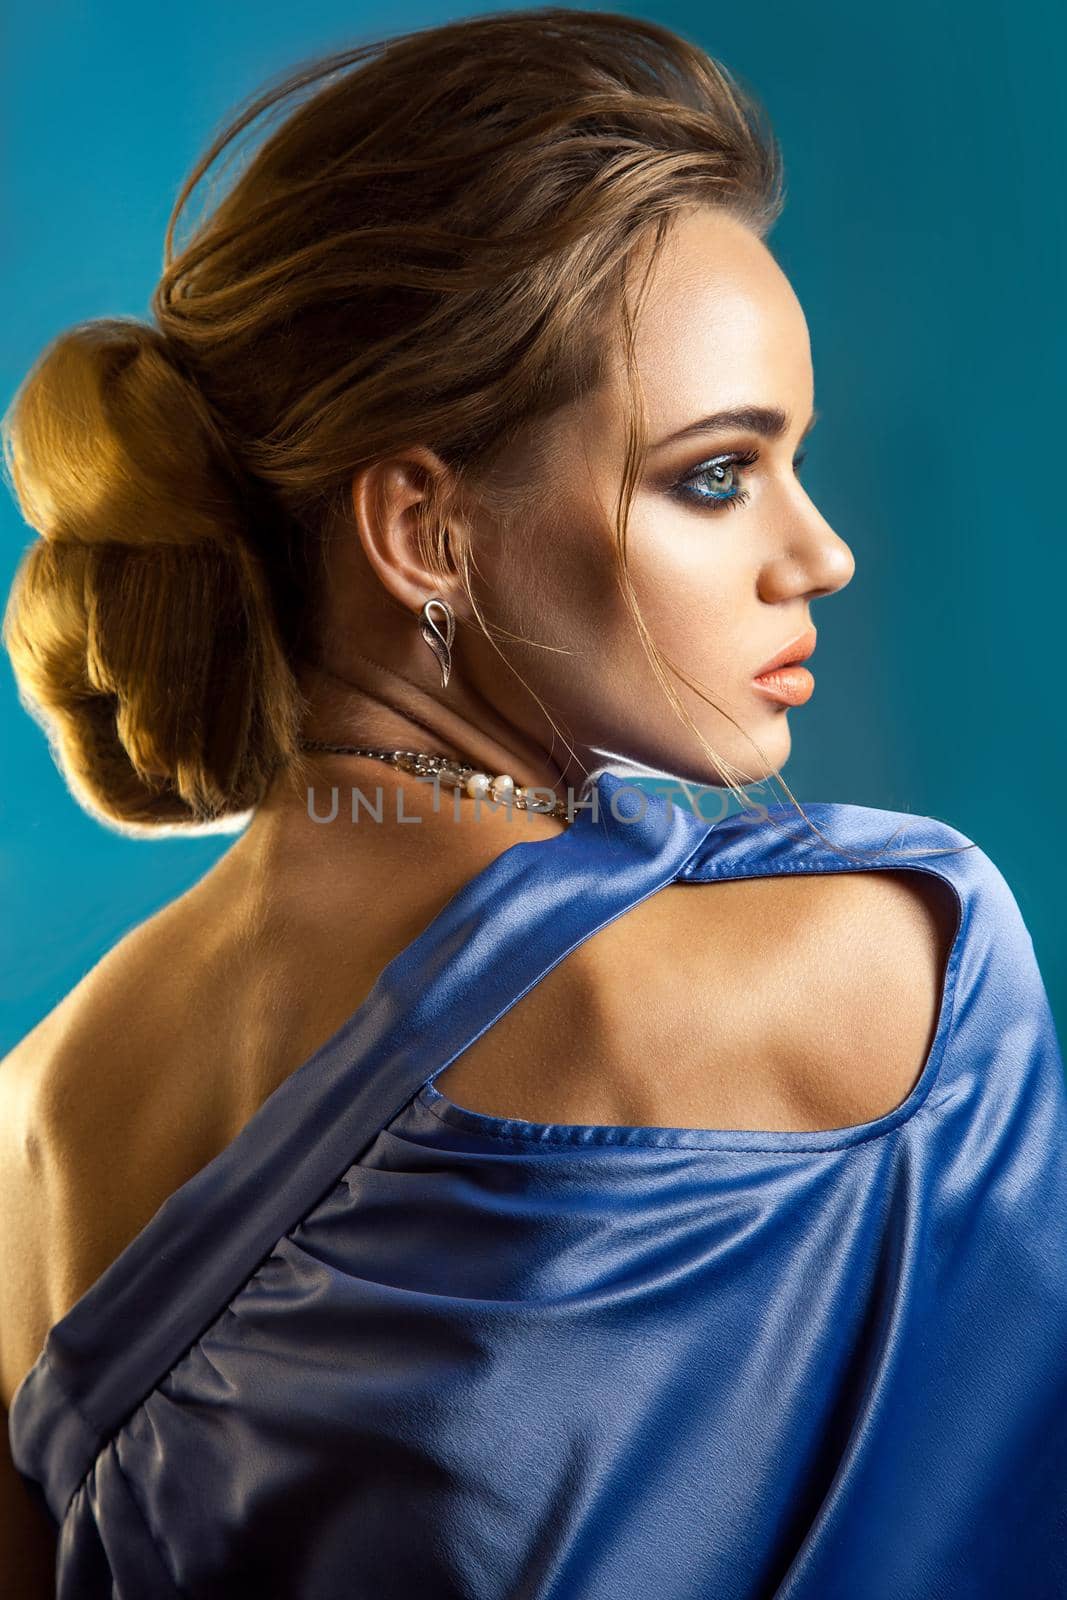 beauty portrait of stylish woman with elegant hairstyle and makeup with blue dress by Khosro1